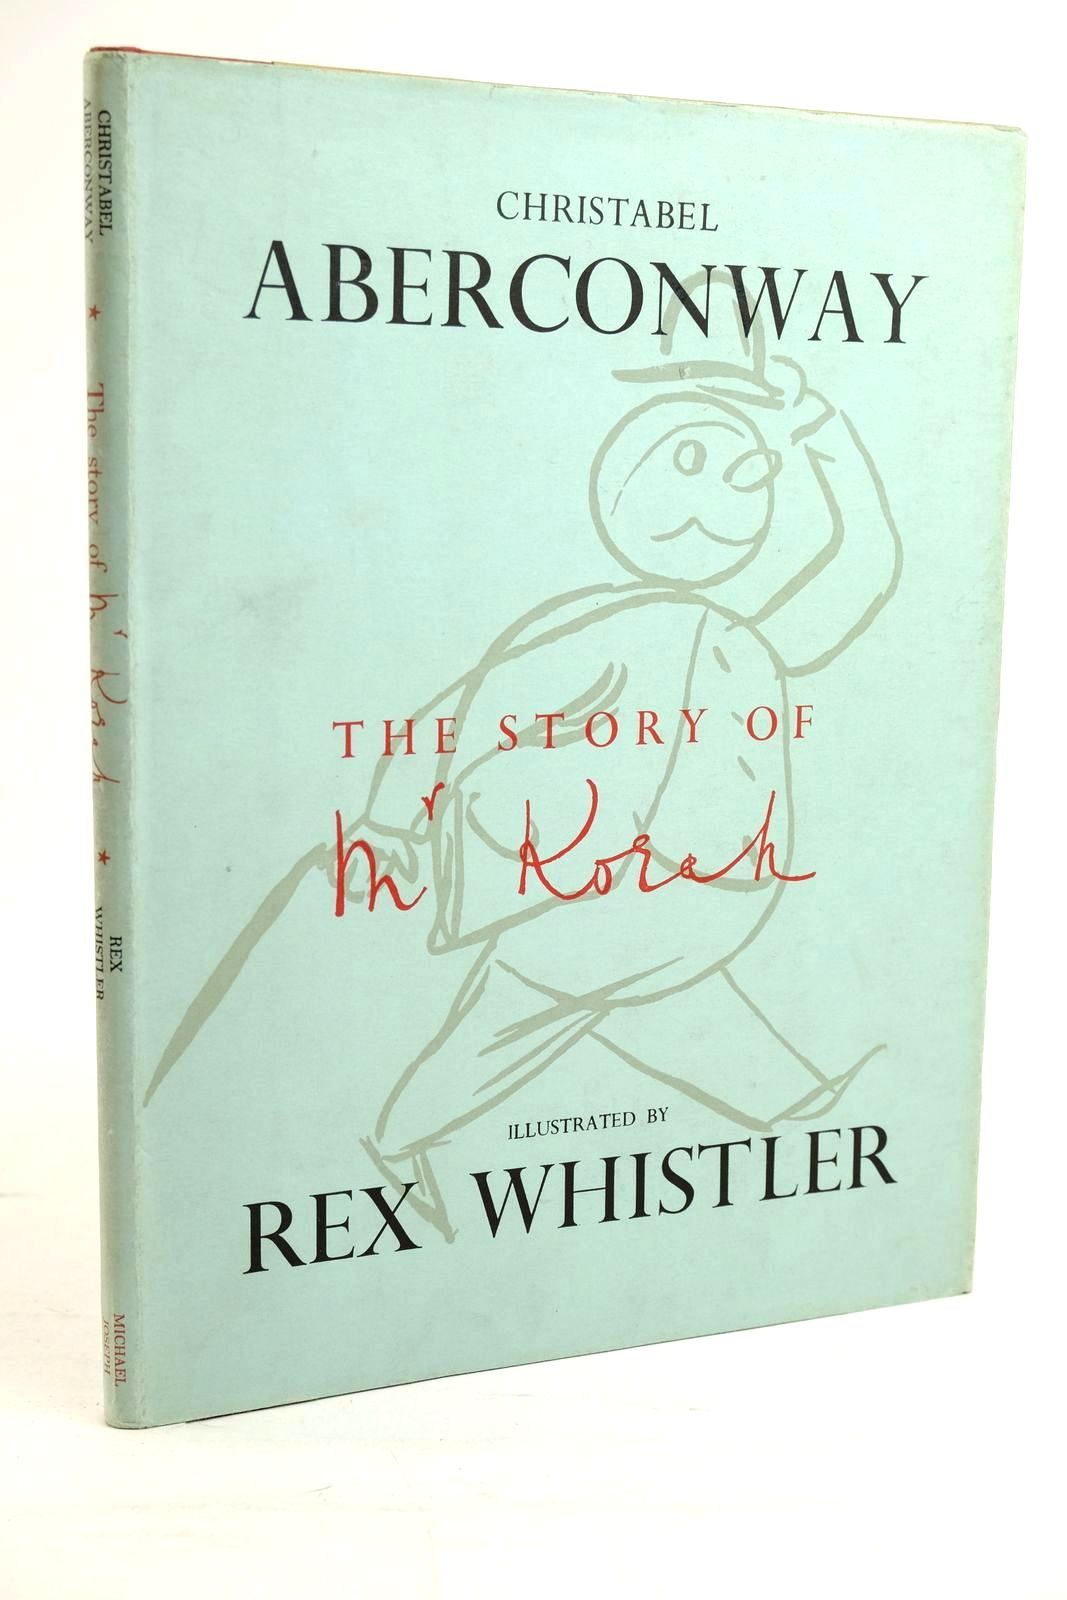 Photo of THE STORY OF MR KORAH written by Aberconway, Christabel illustrated by Whistler, Rex published by Michael Joseph (STOCK CODE: 1320428)  for sale by Stella & Rose's Books